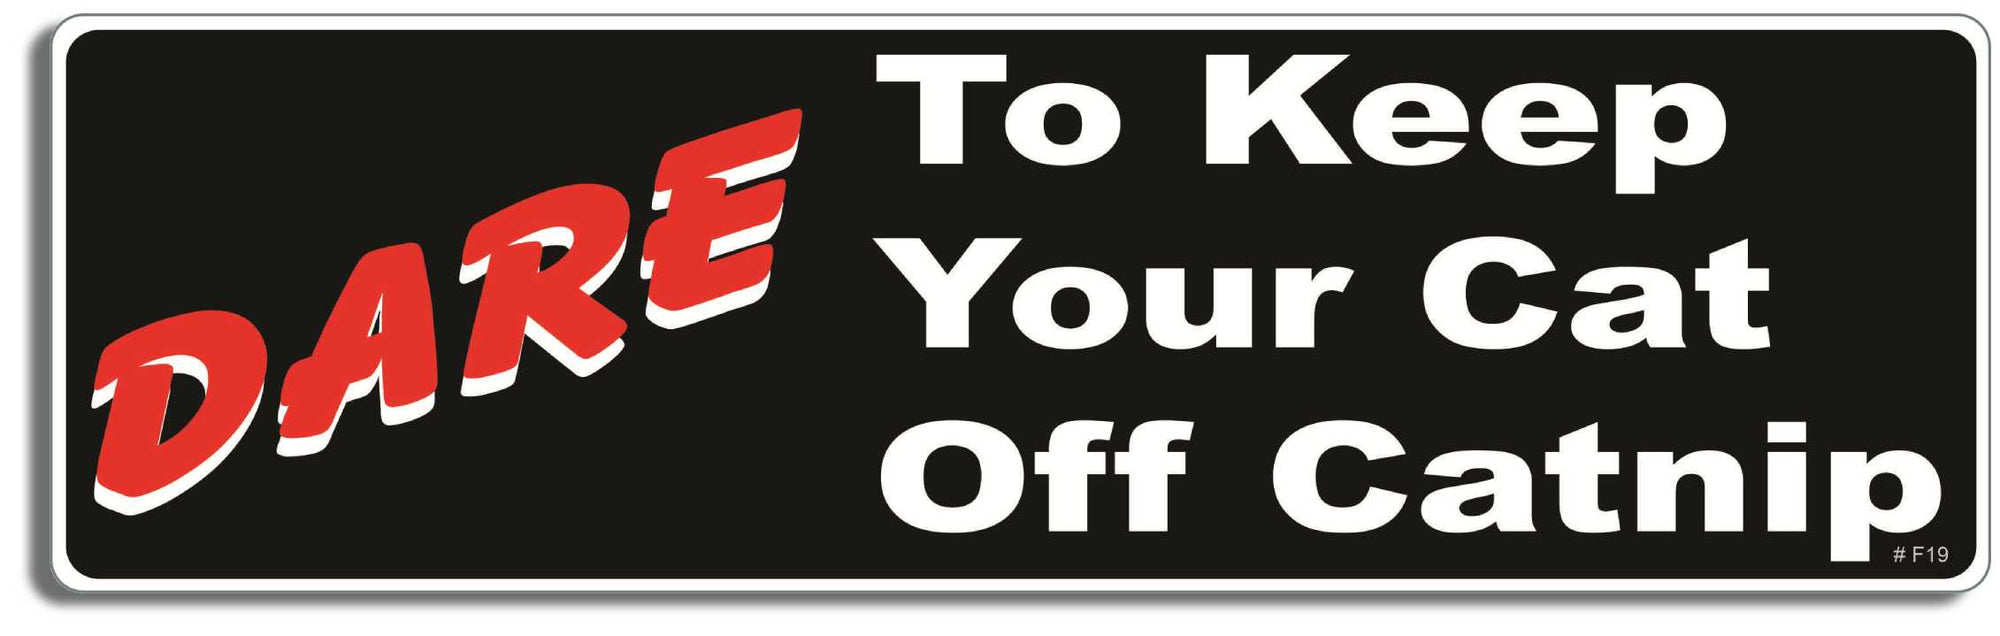 Dare to keep your cat off catnip - 3" x 10" Bumper Sticker--Car Magnet- -  Decal Bumper Sticker-funny Bumper Sticker Car Magnet Dare to keep your cat off catnip-  Decal for carsCats